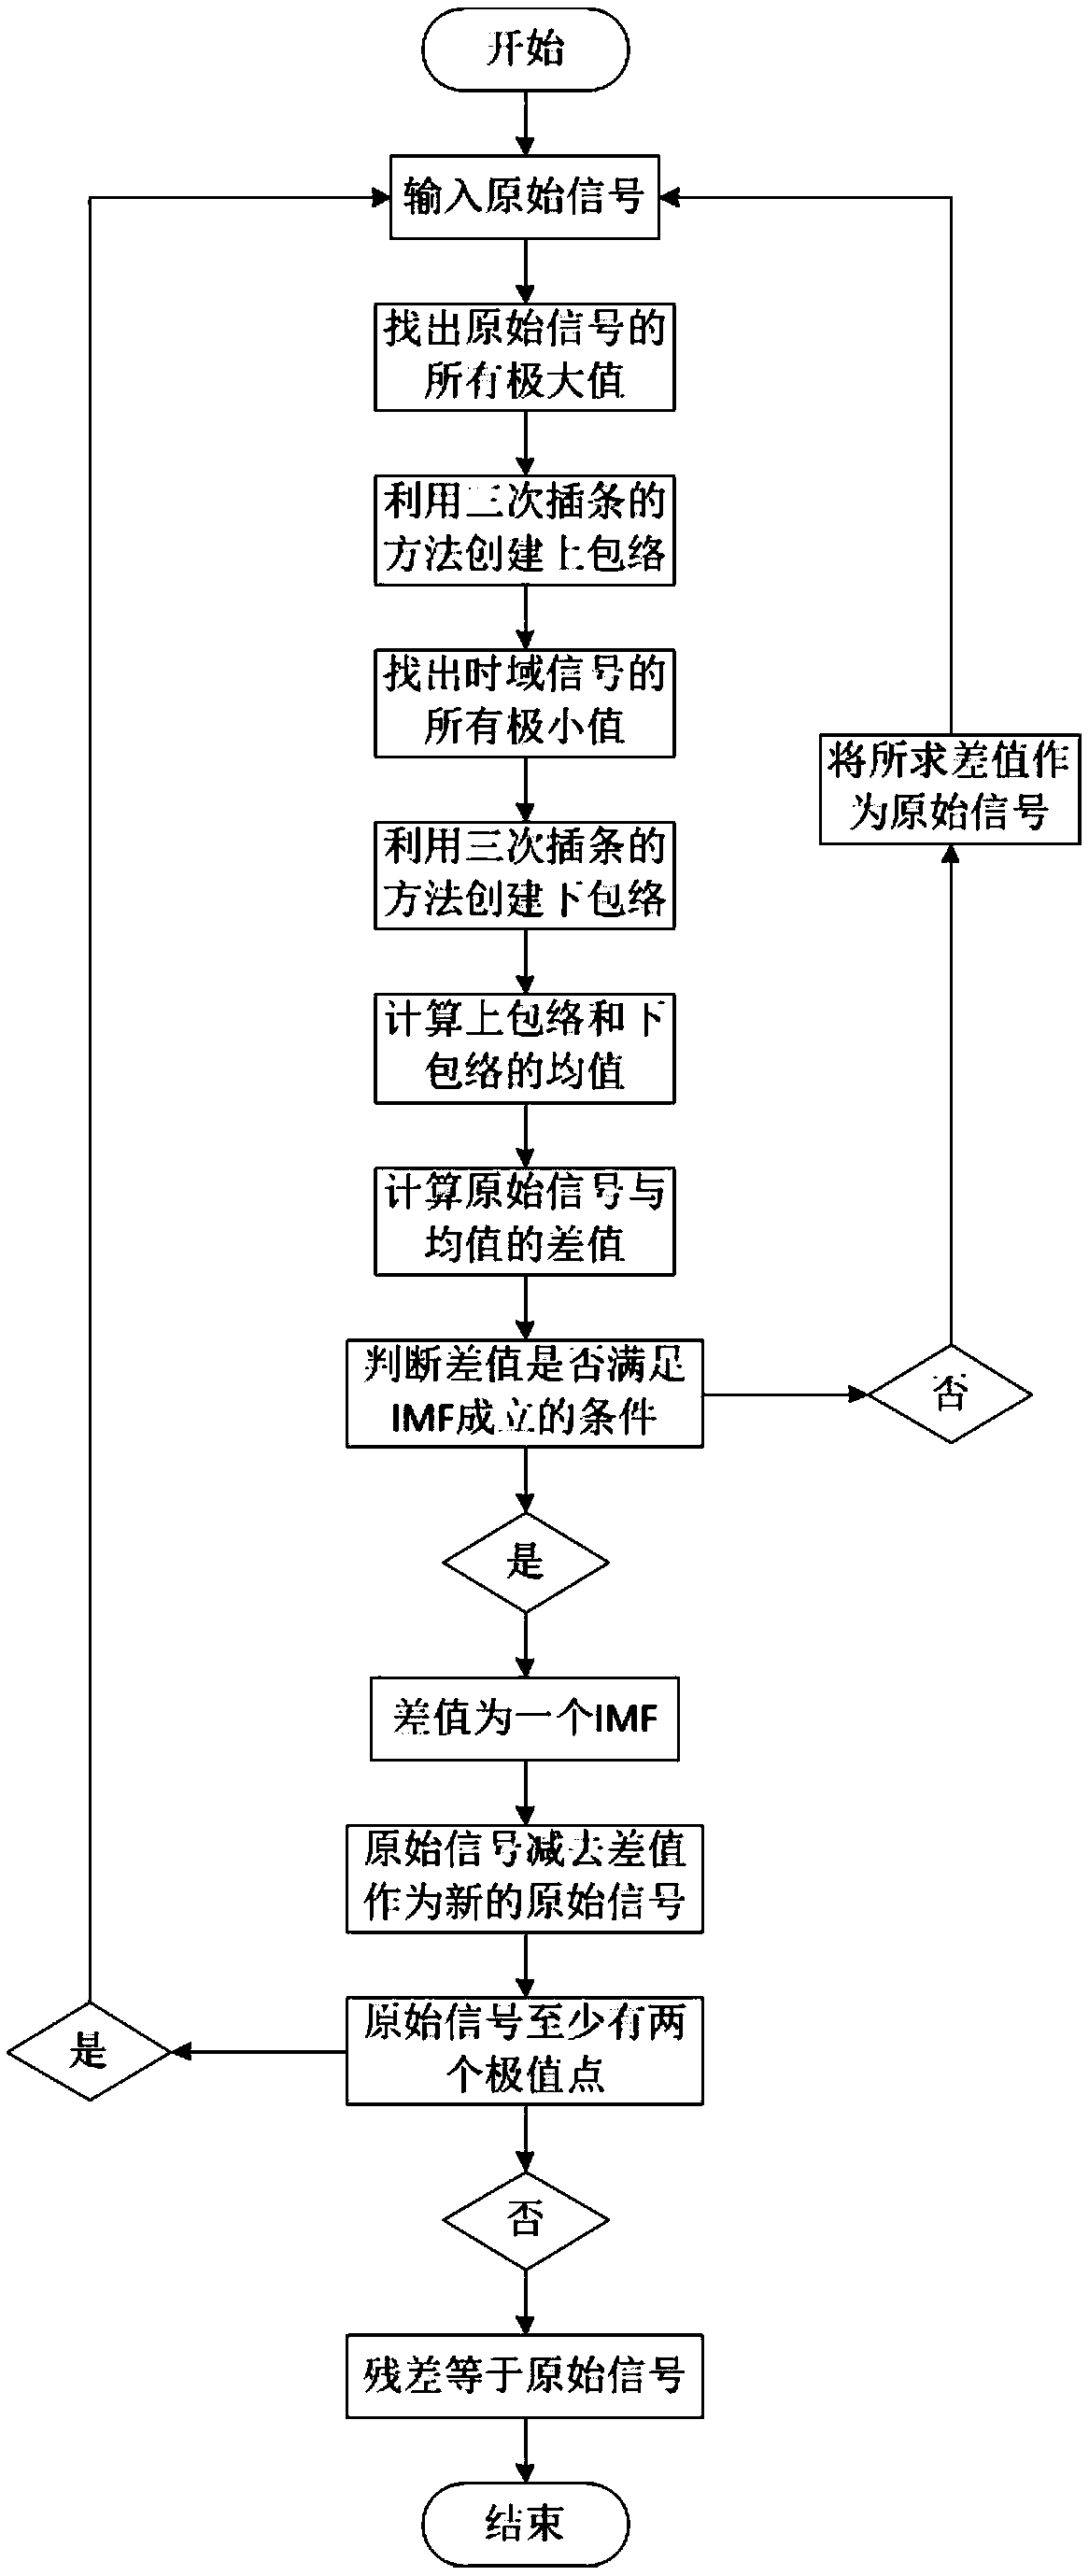 Steam turbine host fault diagnosis method based on feature selection of stationary and non-stationary vibration signals